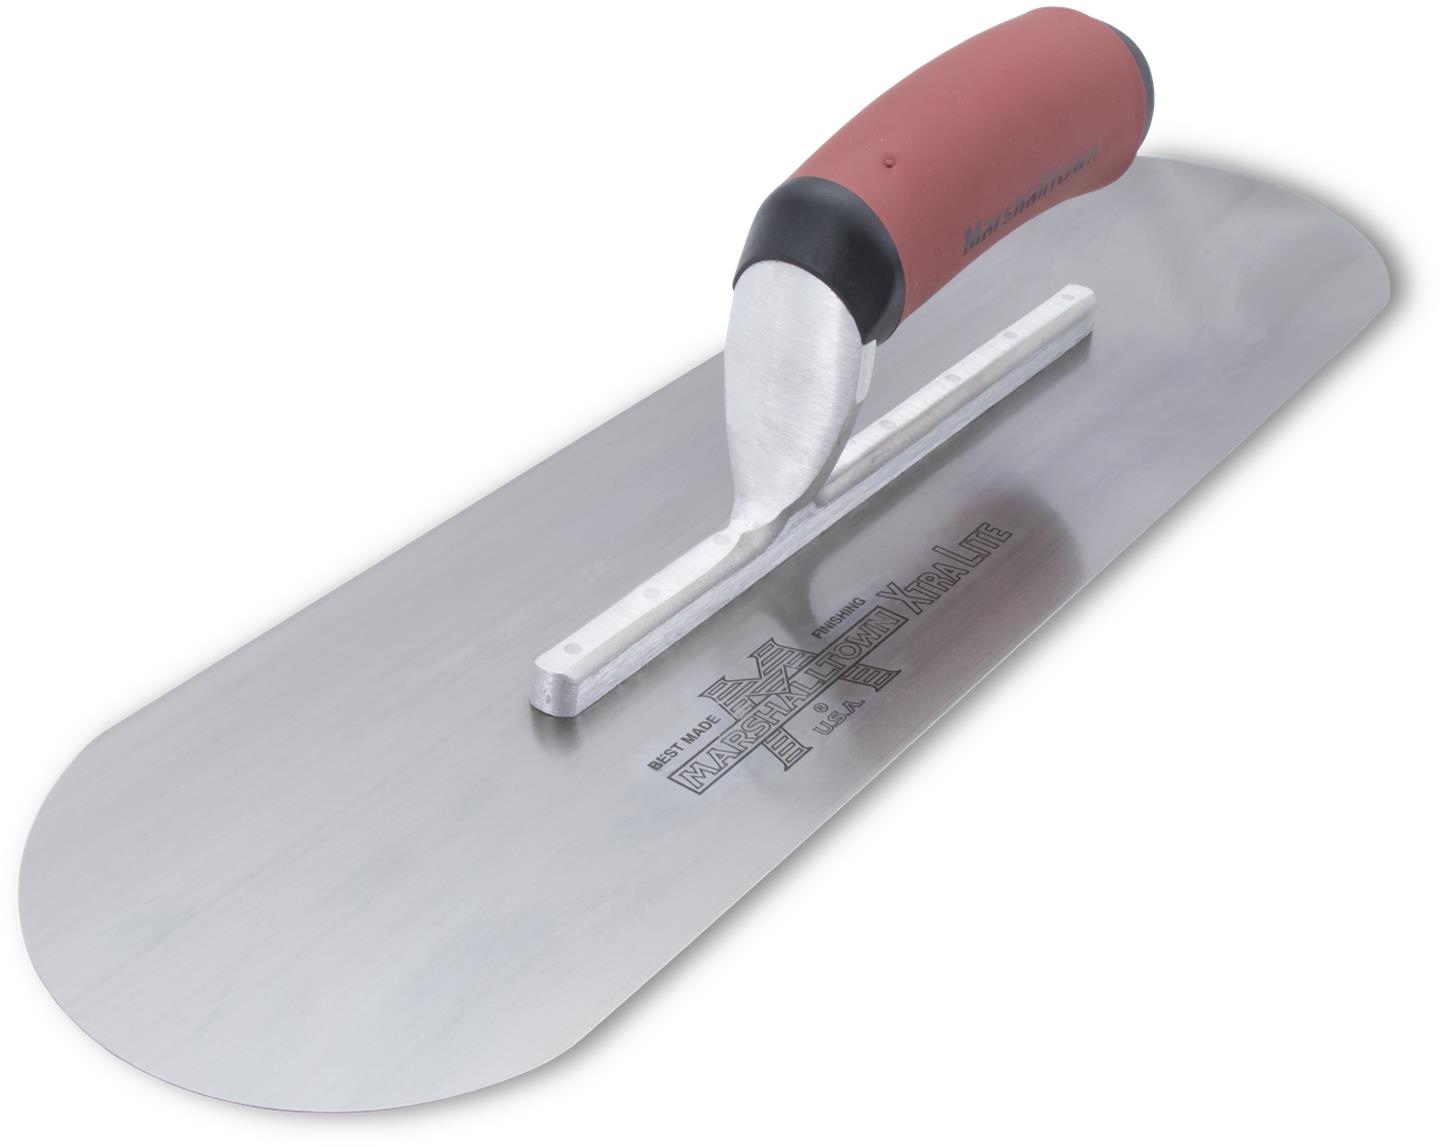 Marshalltown 16in x 4-1/2in Pool Trowel w/DuraSoft Handle - Utility and Pocket Knives